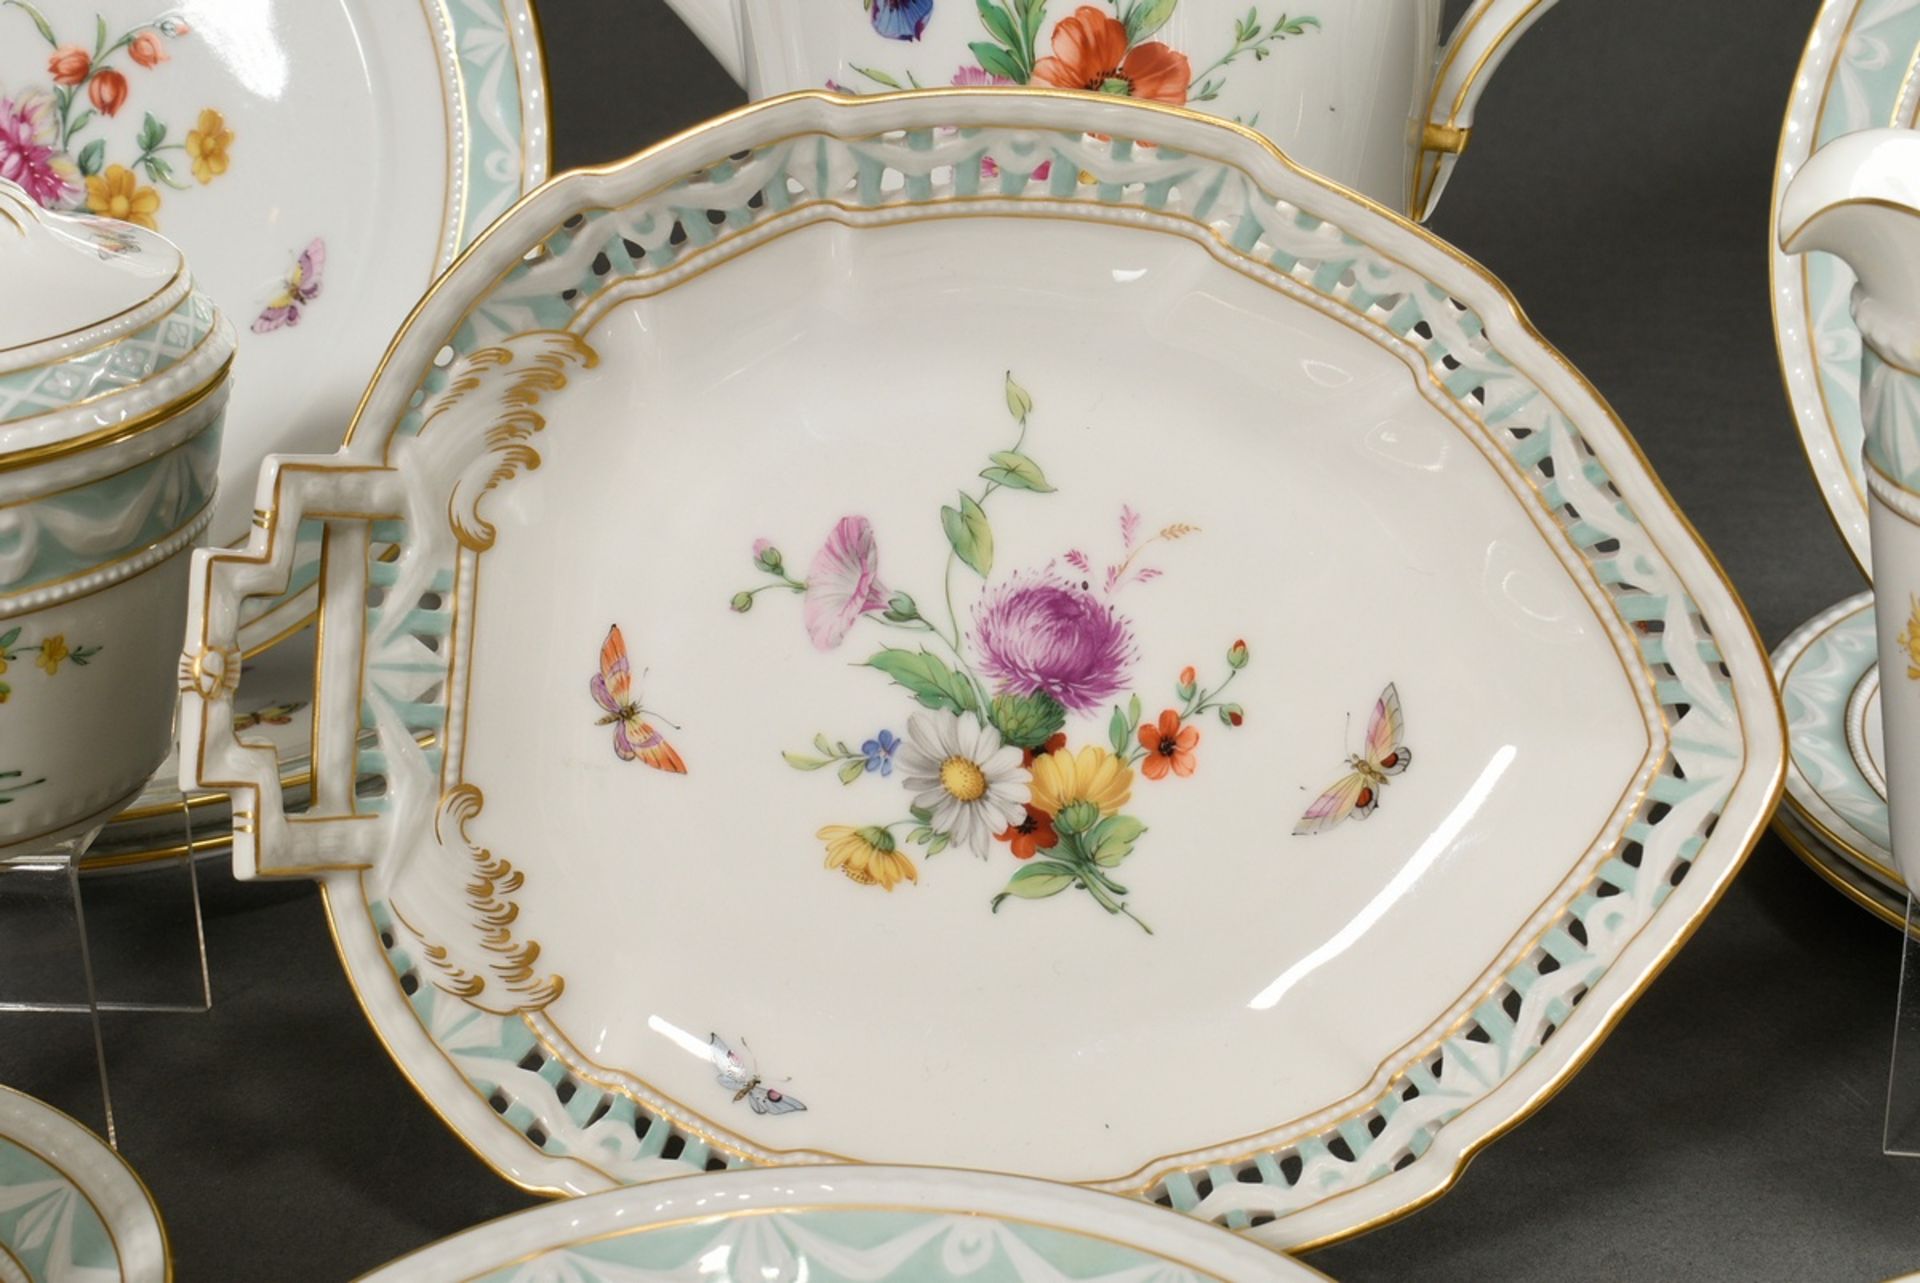 15 Pieces KPM coffee service "Kurland" with flowers and insects, gold staffage and turquoise frieze - Image 7 of 10